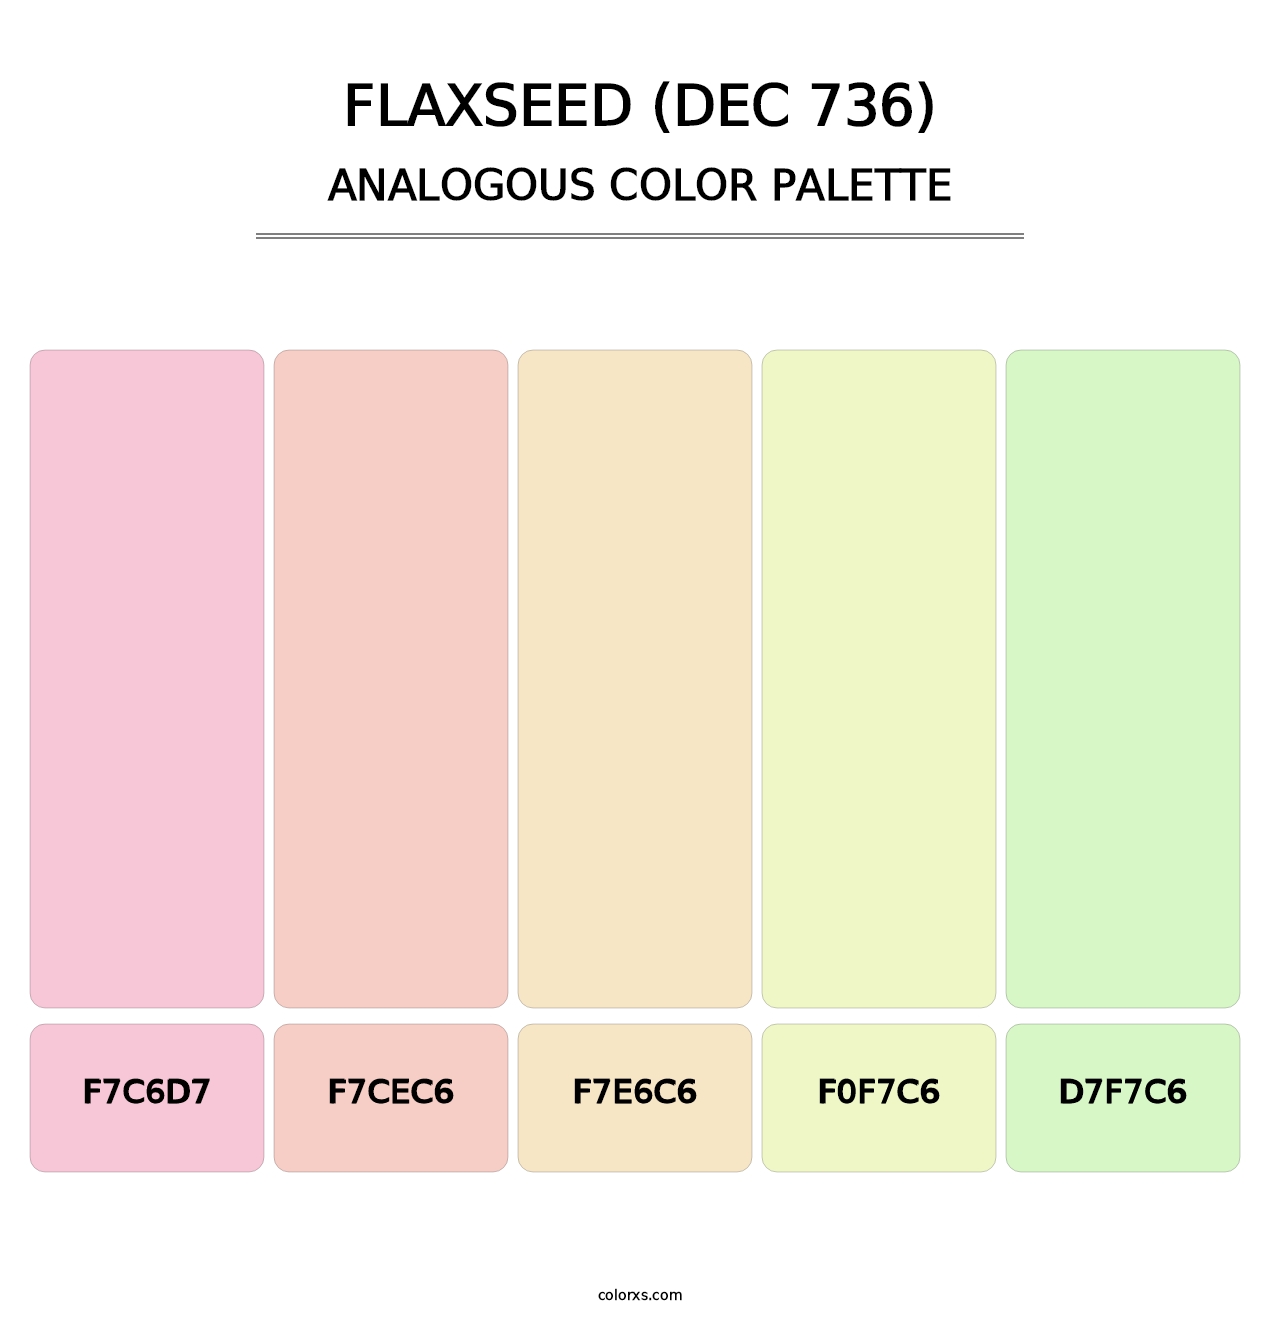 Flaxseed (DEC 736) - Analogous Color Palette